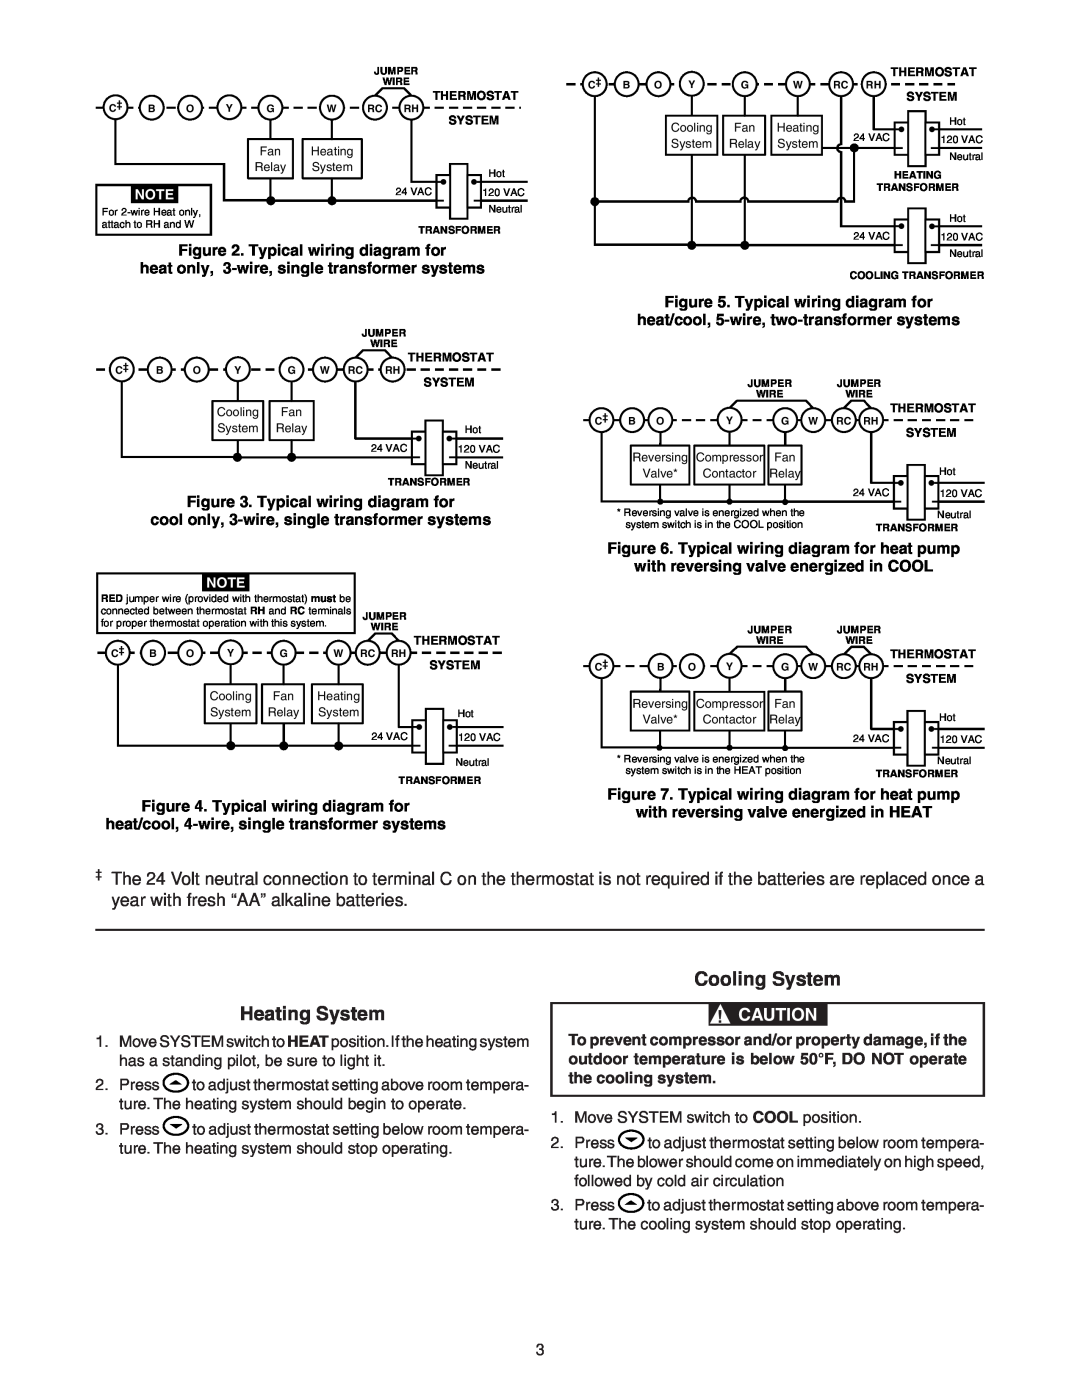 White Rodgers 875 Heating System, Cooling System, Typical wiring diagram for, heat only, 3-wire,single transformer systems 